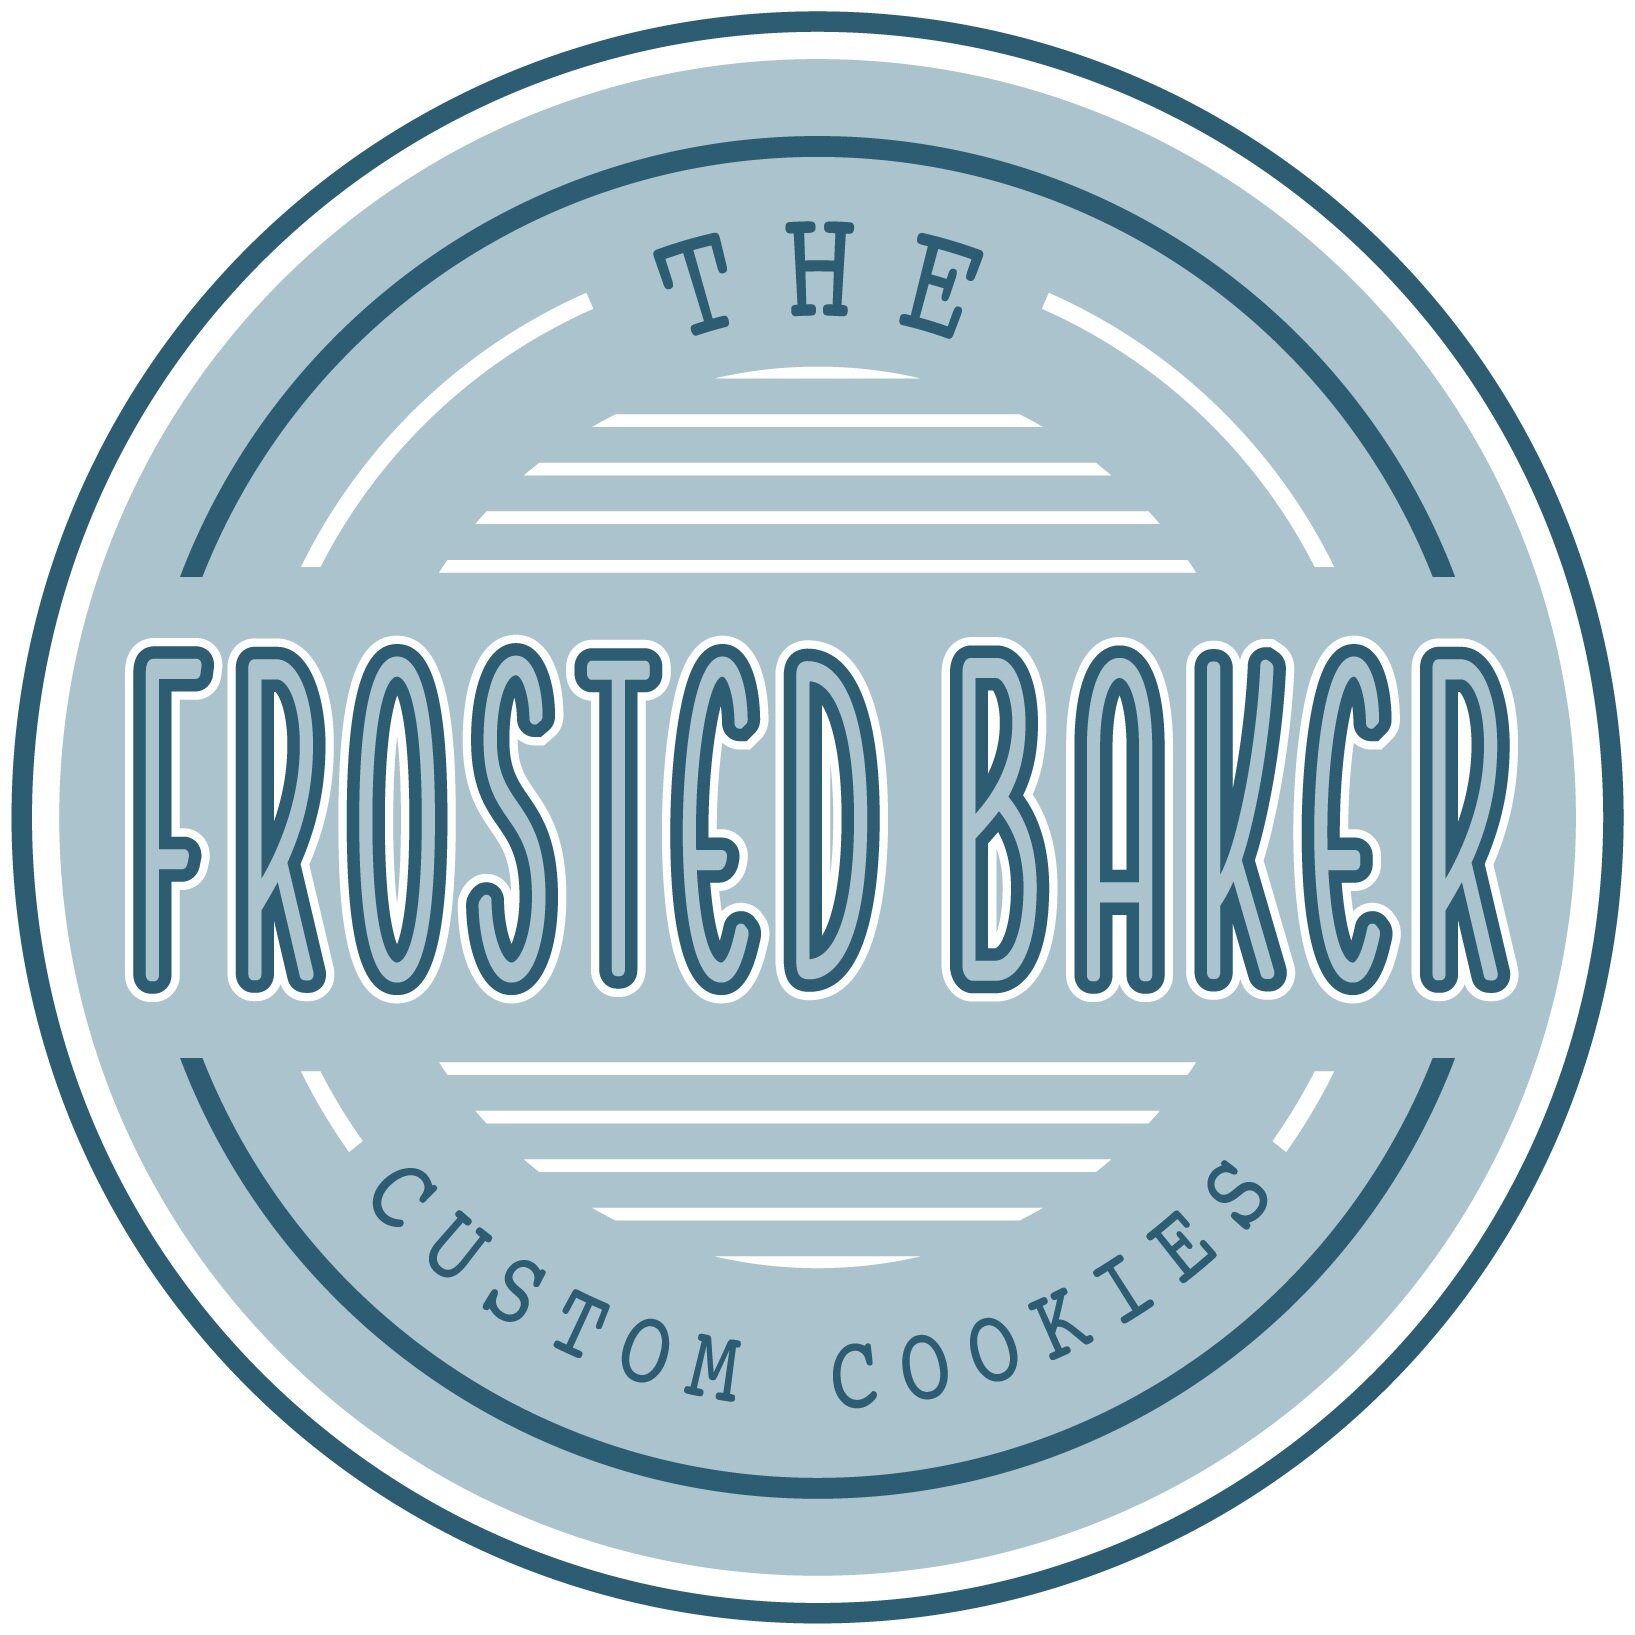 The Frosted Baker